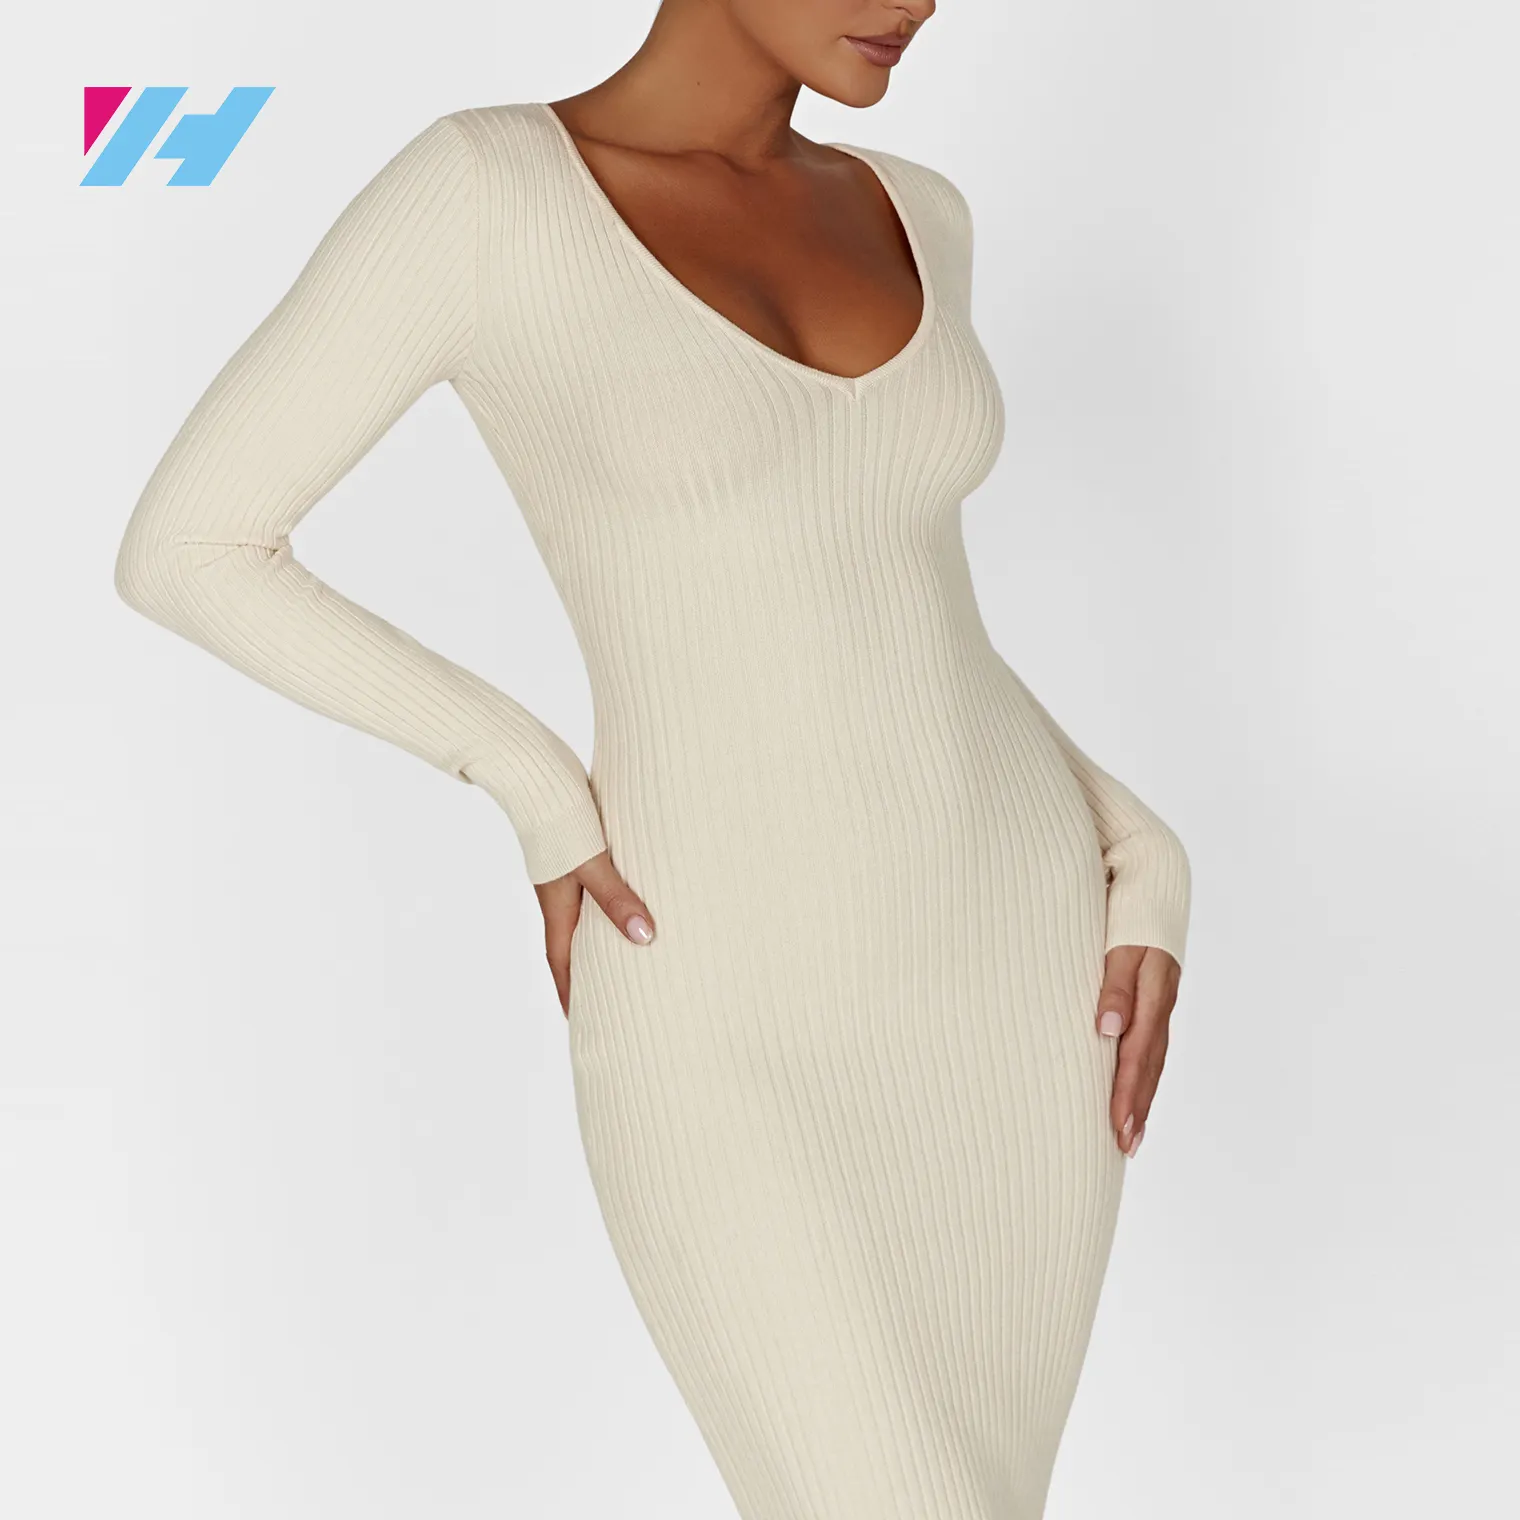 New Autumn Winter Casual Bodycon Long Sleeve Elegant V Neck Knit Sweater Maxi Dress For Women